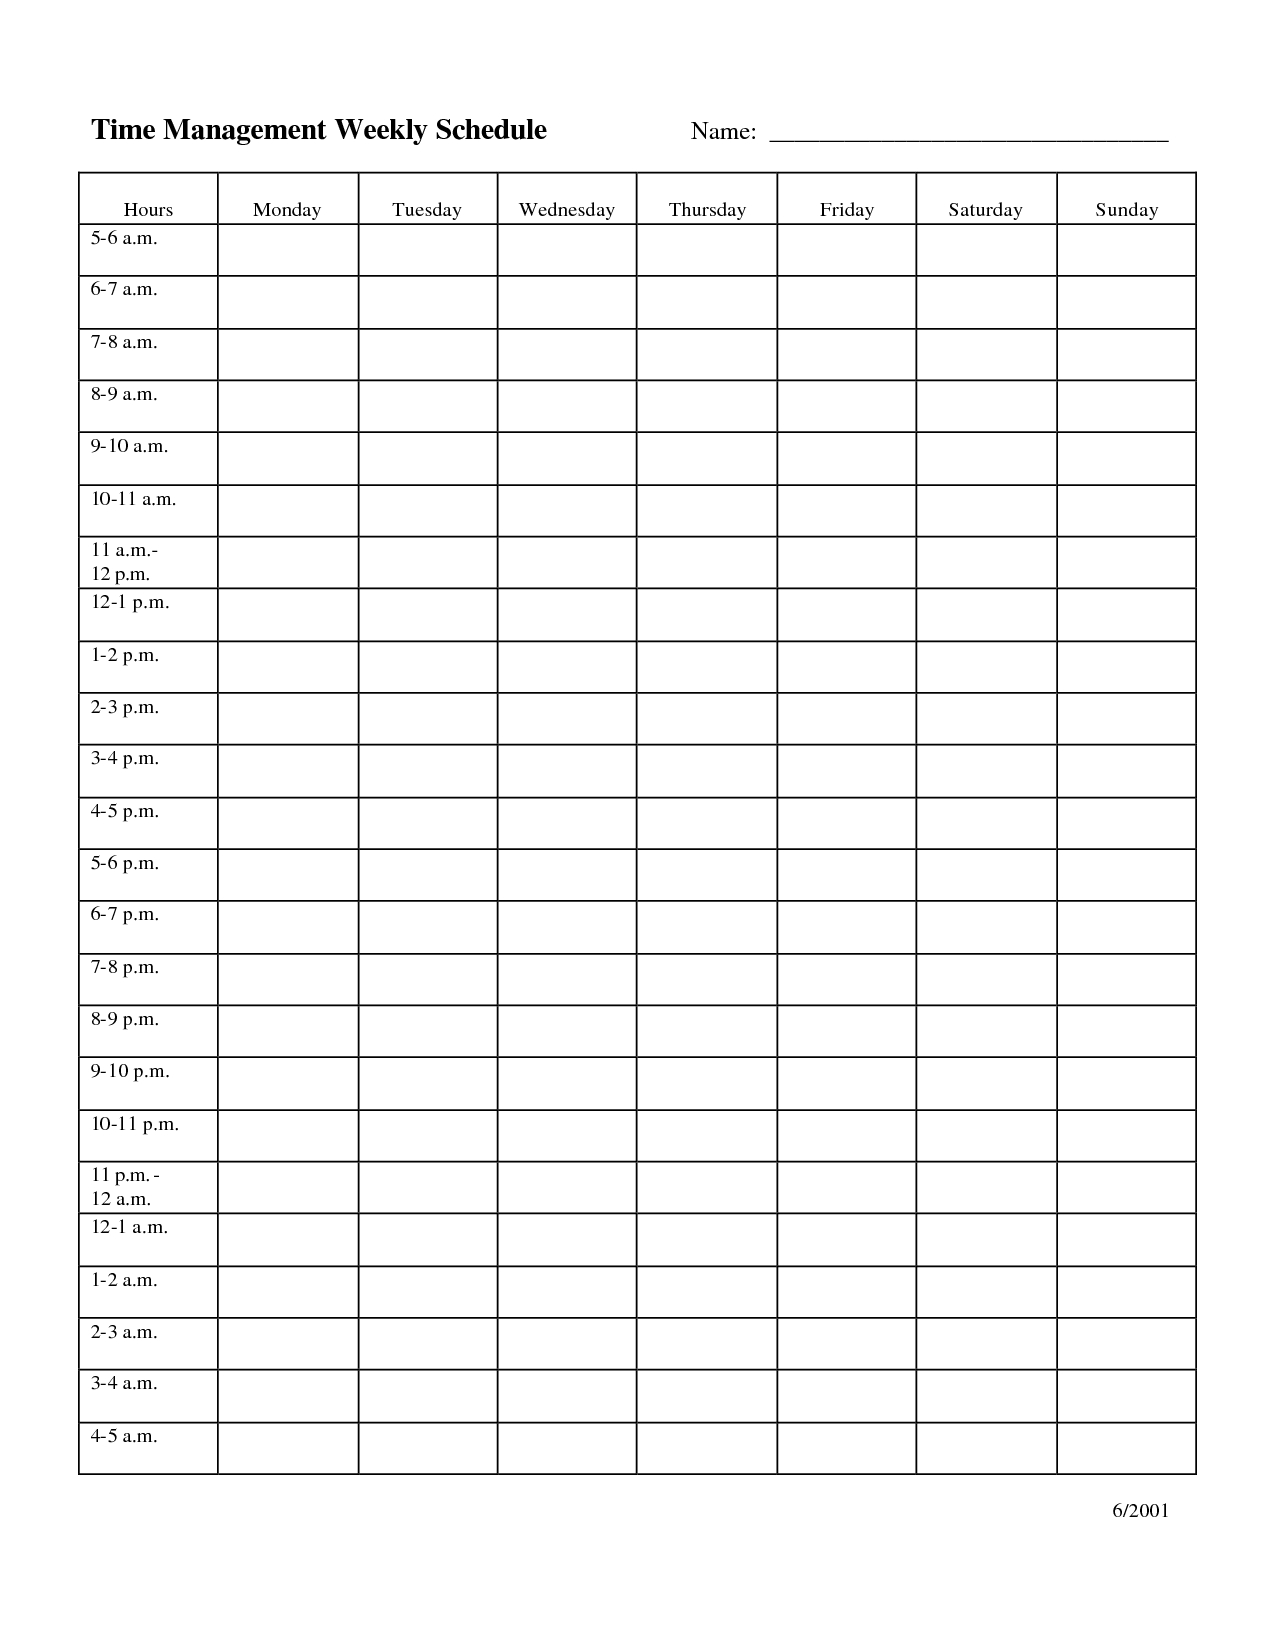 Time Management Weekly Schedule Template … | Bobbies Wish List | Sched… with Week Schedule Template With Times